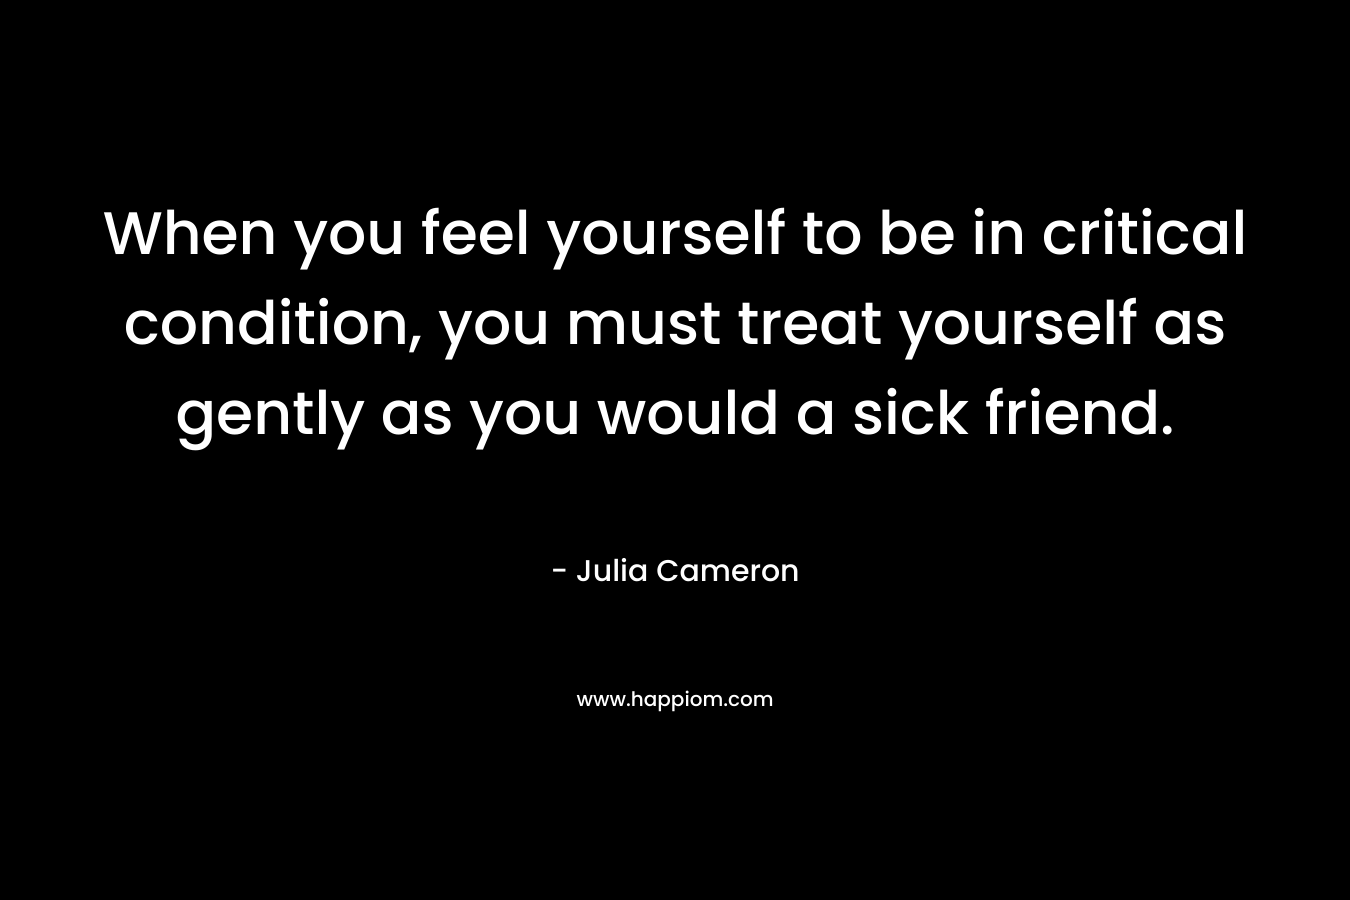 When you feel yourself to be in critical condition, you must treat yourself as gently as you would a sick friend.